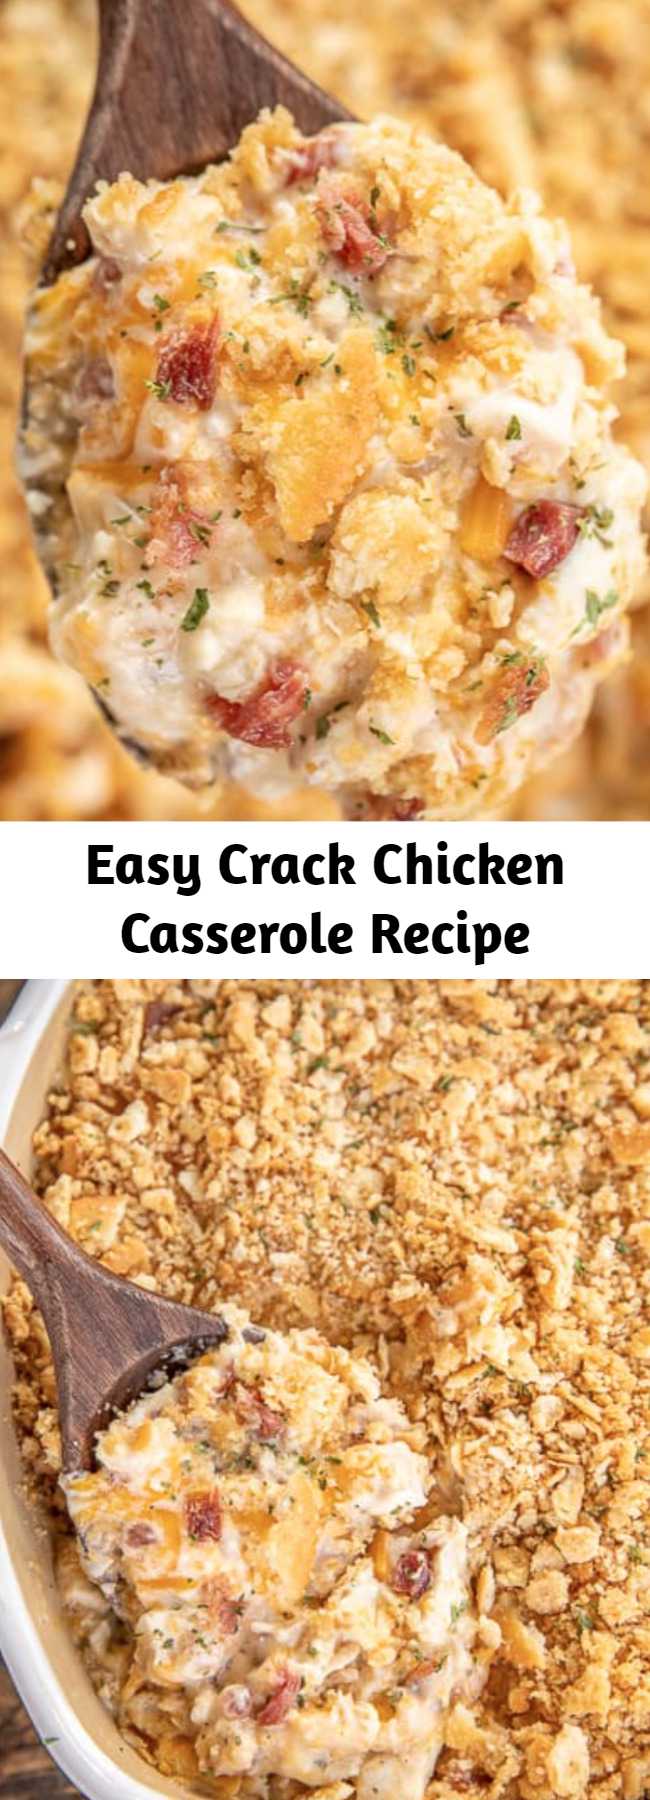 Easy Crack Chicken Casserole Recipe - creamy chicken casserole loaded with cheddar, bacon and ranch. Use a rotisserie chicken for easy prep! Chicken, cheddar, bacon, ranch seasoning, sour cream, cream of chicken soup. The whole family LOVED this easy chicken casserole. It is already on the menu again this week! #chicken #casserole #chickencasserole